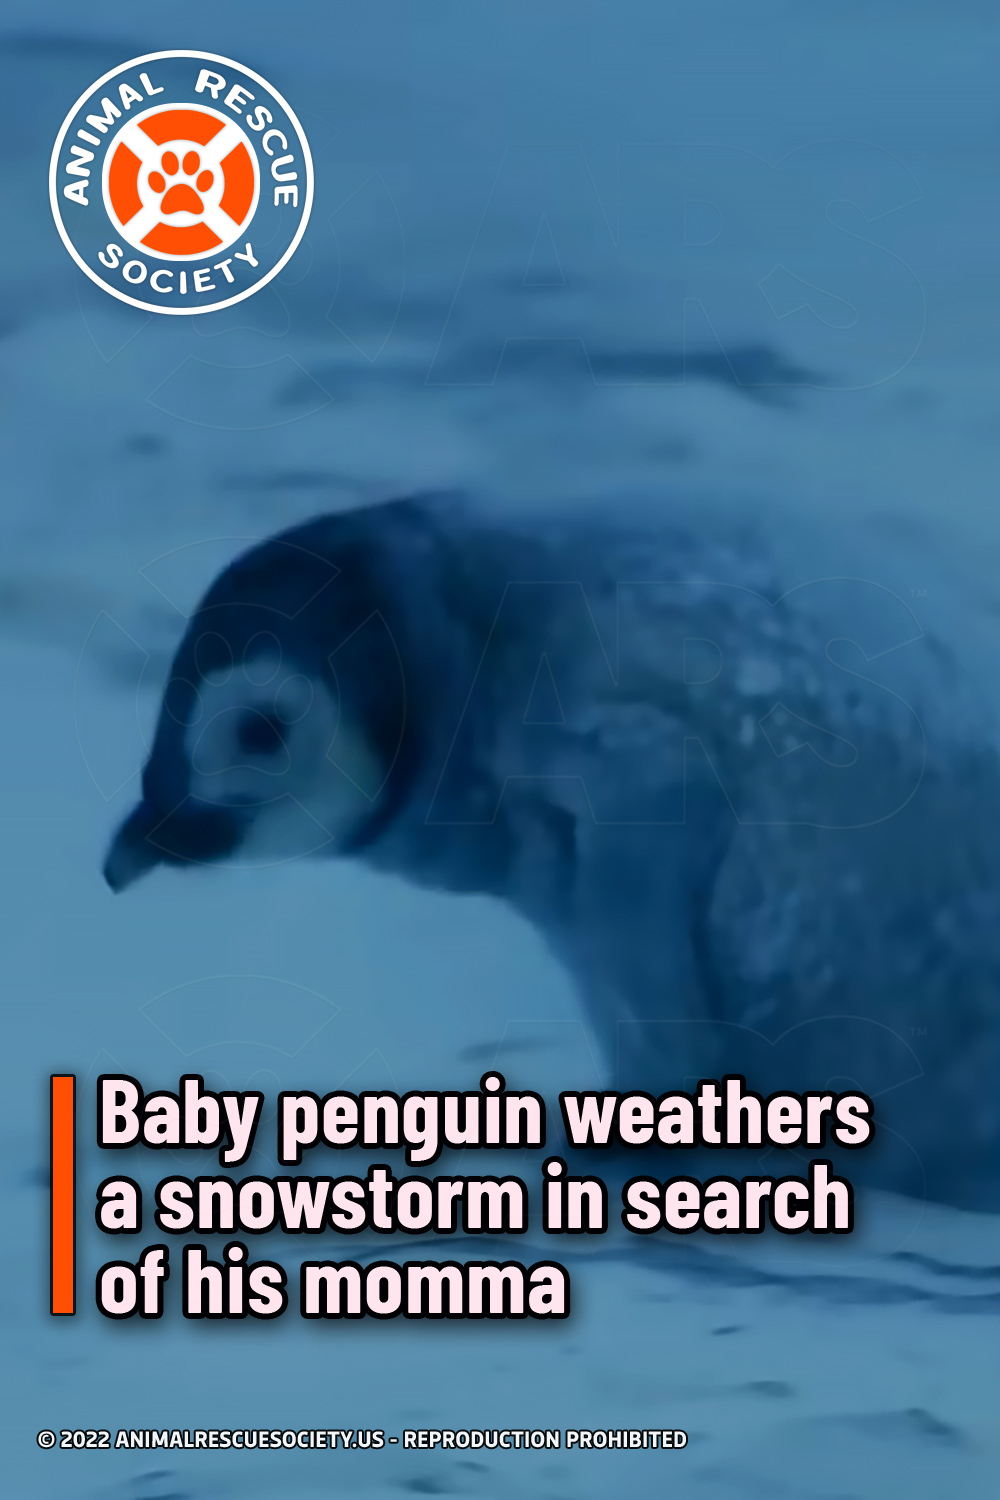 Baby penguin weathers a snowstorm in search of his momma